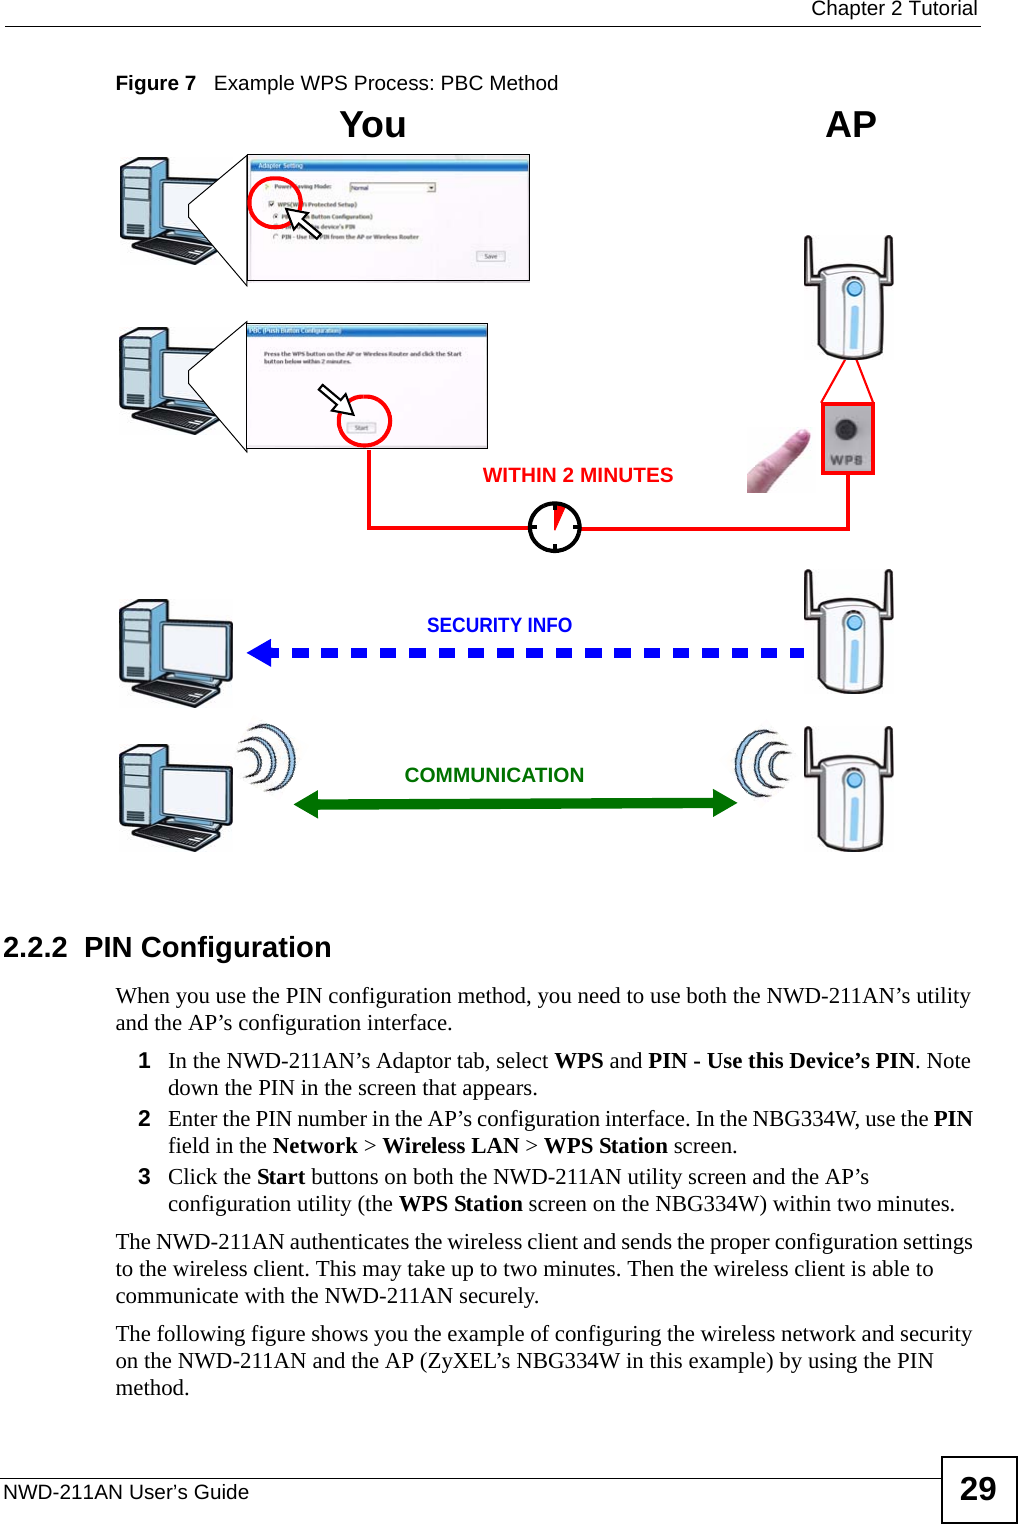  Chapter 2 TutorialNWD-211AN User’s Guide 29Figure 7   Example WPS Process: PBC Method2.2.2  PIN ConfigurationWhen you use the PIN configuration method, you need to use both the NWD-211AN’s utility and the AP’s configuration interface.1In the NWD-211AN’s Adaptor tab, select WPS and PIN - Use this Device’s PIN. Note down the PIN in the screen that appears. 2Enter the PIN number in the AP’s configuration interface. In the NBG334W, use the PIN field in the Network &gt; Wireless LAN &gt; WPS Station screen. 3Click the Start buttons on both the NWD-211AN utility screen and the AP’s configuration utility (the WPS Station screen on the NBG334W) within two minutes. The NWD-211AN authenticates the wireless client and sends the proper configuration settings to the wireless client. This may take up to two minutes. Then the wireless client is able to communicate with the NWD-211AN securely. The following figure shows you the example of configuring the wireless network and security on the NWD-211AN and the AP (ZyXEL’s NBG334W in this example) by using the PIN method. You APSECURITY INFOCOMMUNICATIONWITHIN 2 MINUTES